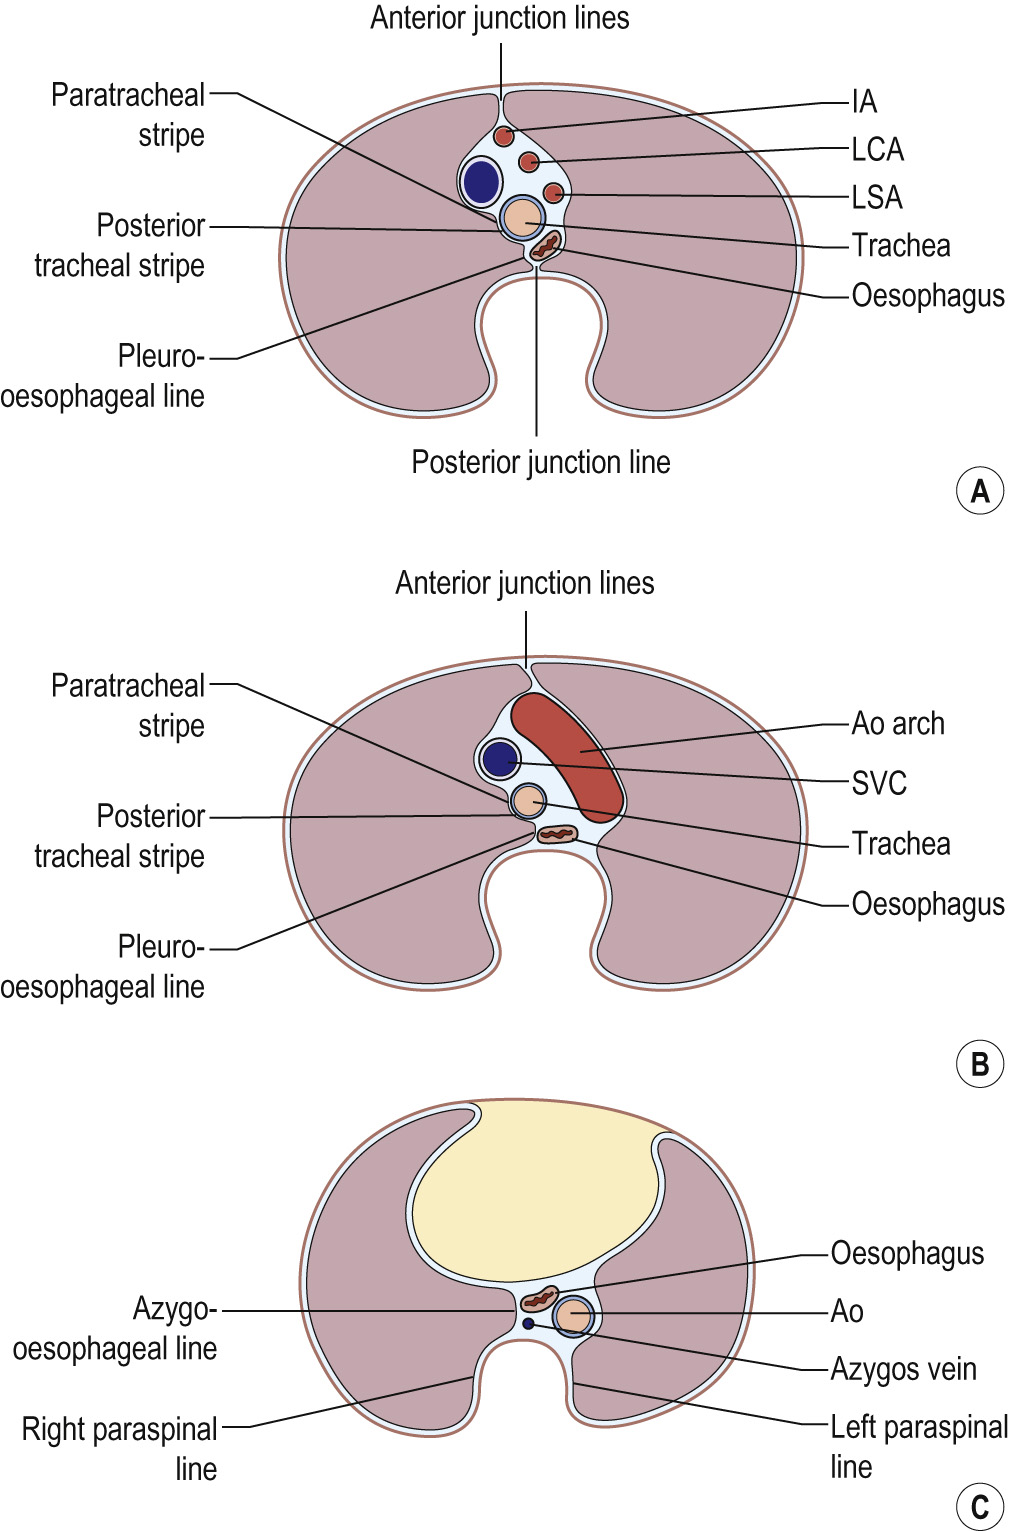 Diagrams illustrating the mediastinal boundaries and junction lines. The visualisation of the junction lines on a plain chest radiograph is variable, depending on how much fat is present in the mediastinum and on how closely the two lungs approximate to one another. (A) Section just above the level of the aortic arch. (B) Section through the aortic arch. (C) Section through the heart. **